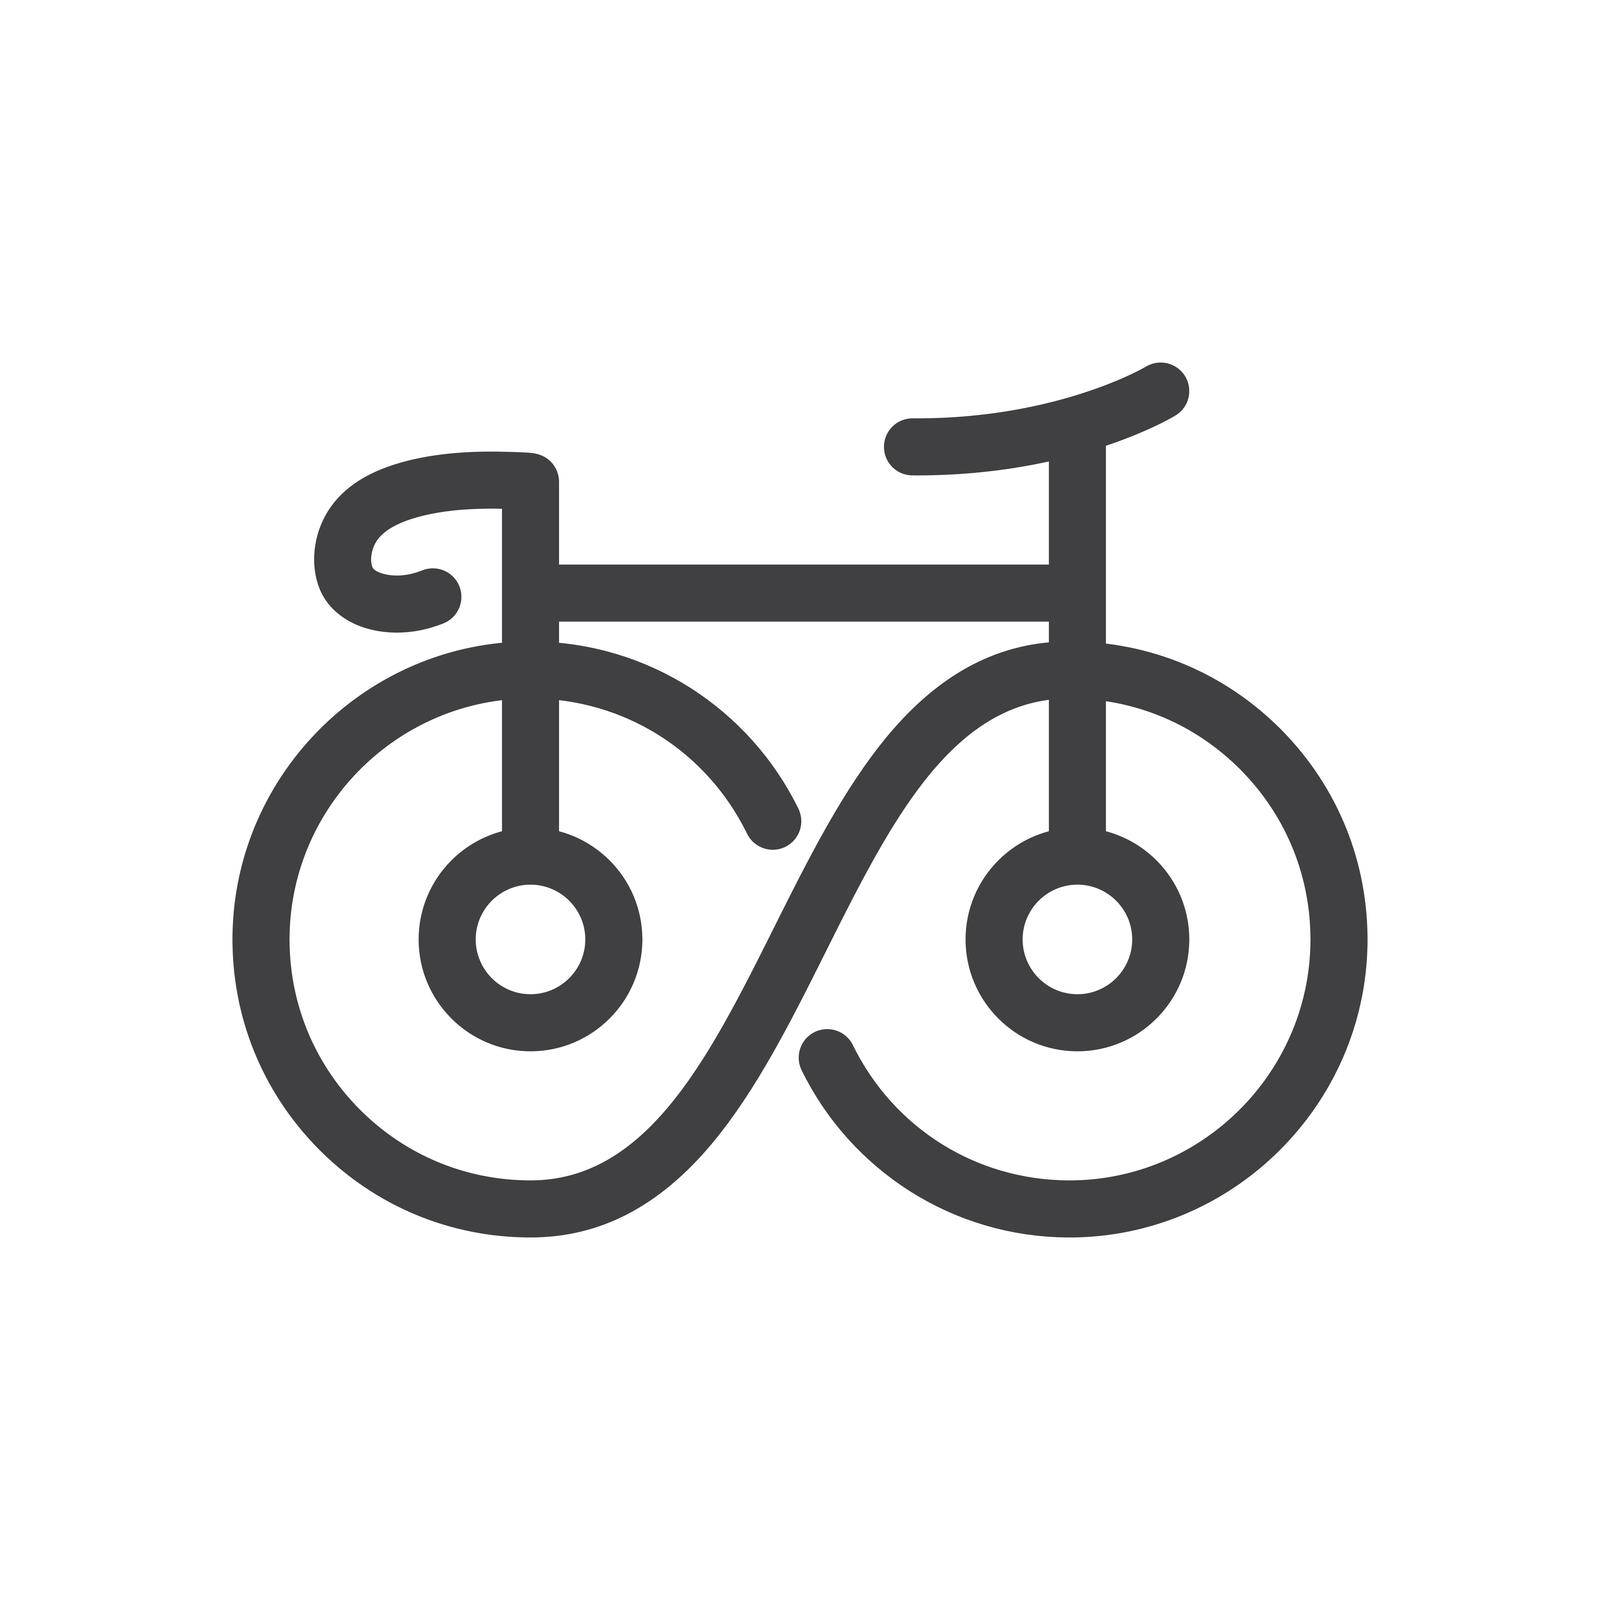 Bicycle illustration logo by awk